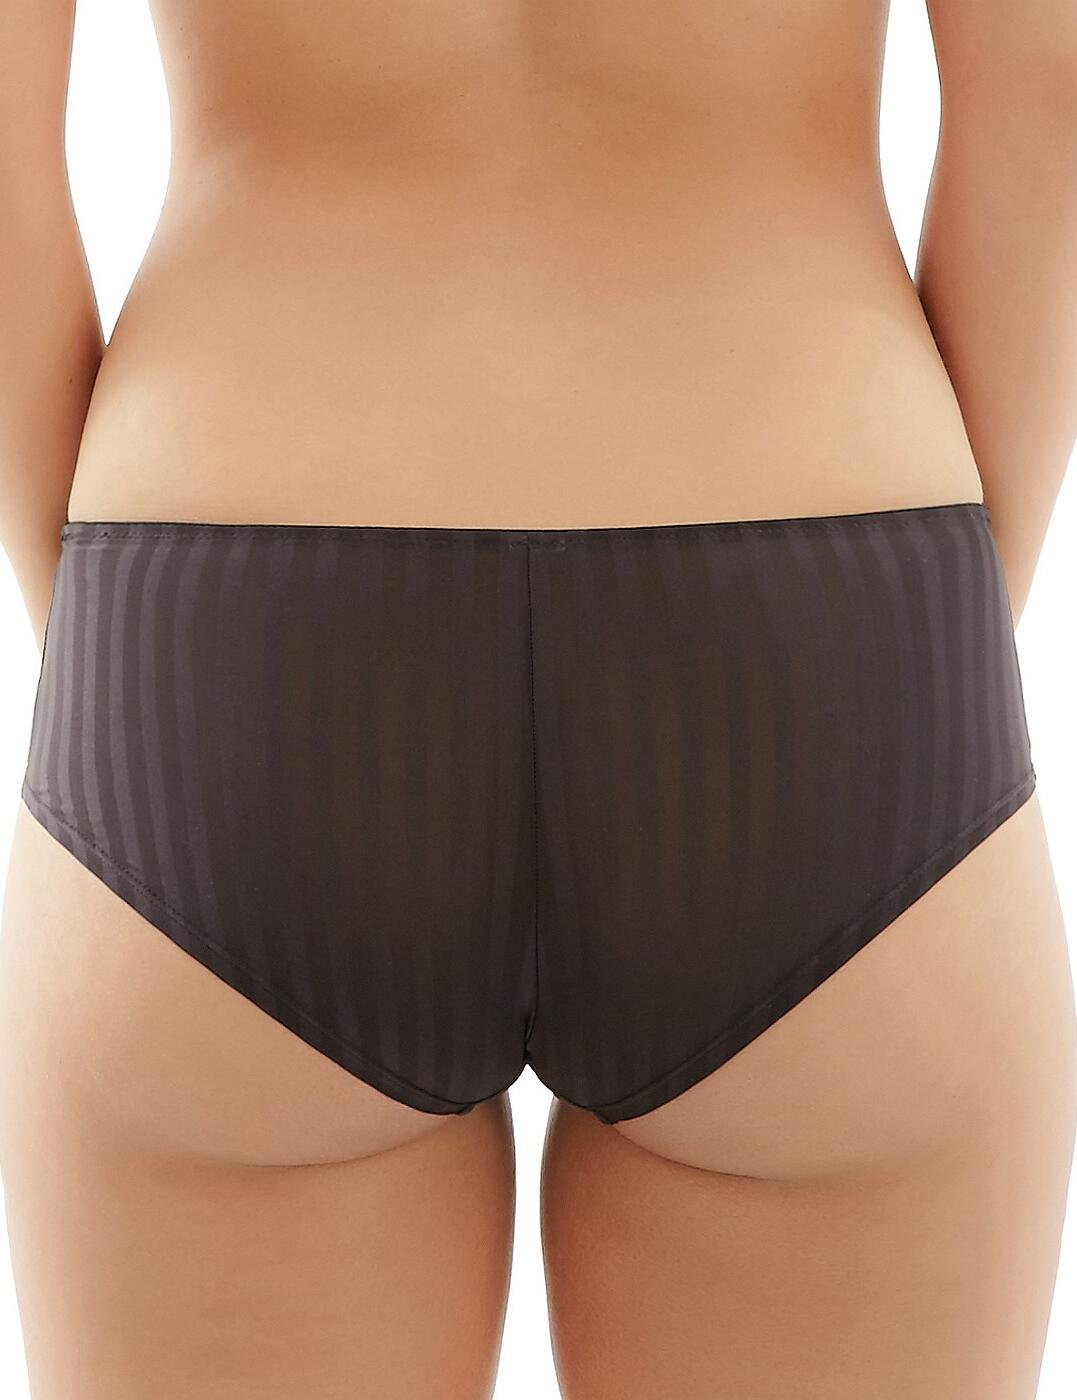 Cleo By Panache Lexi Shorts Knickers Briefs 9424 Rear